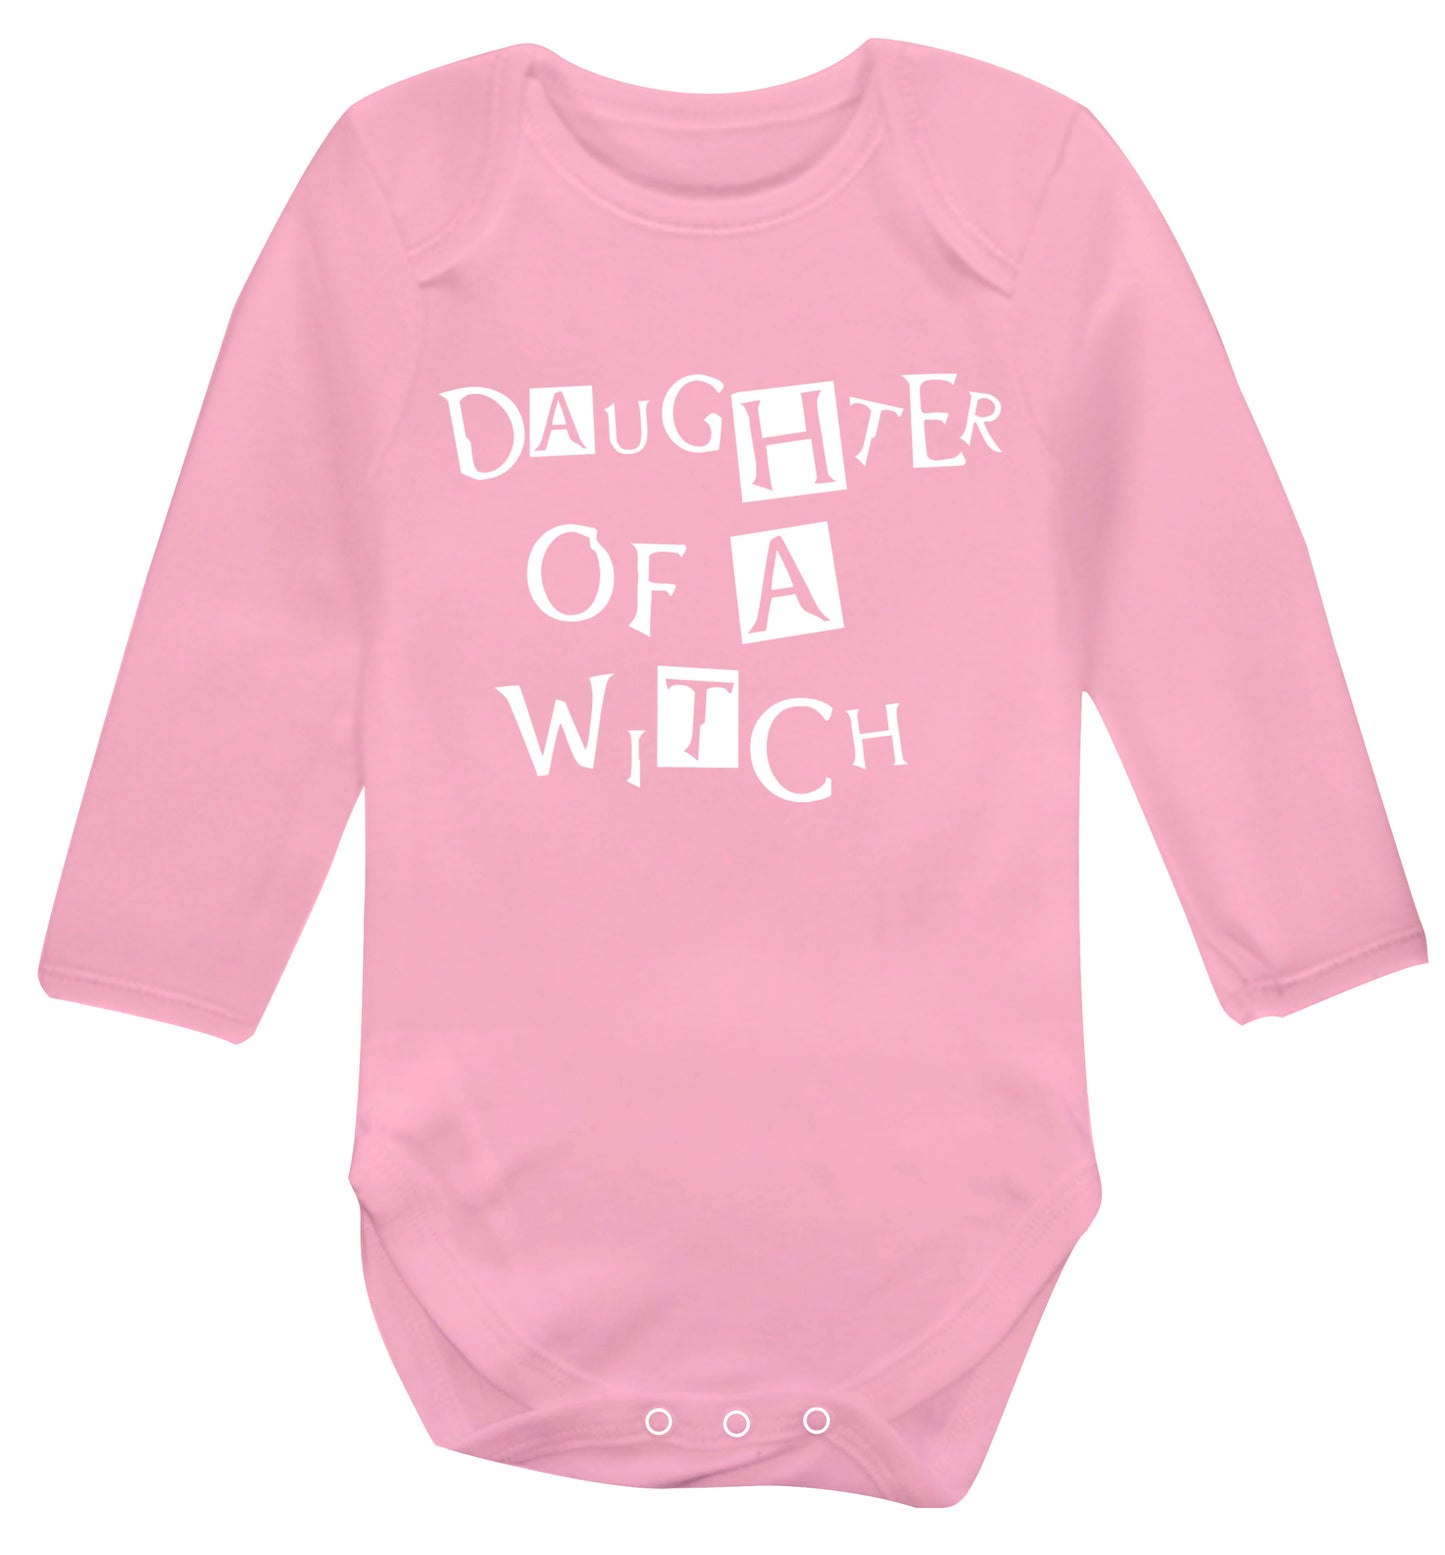 Daughter of a witch Baby Vest long sleeved pale pink 6-12 months